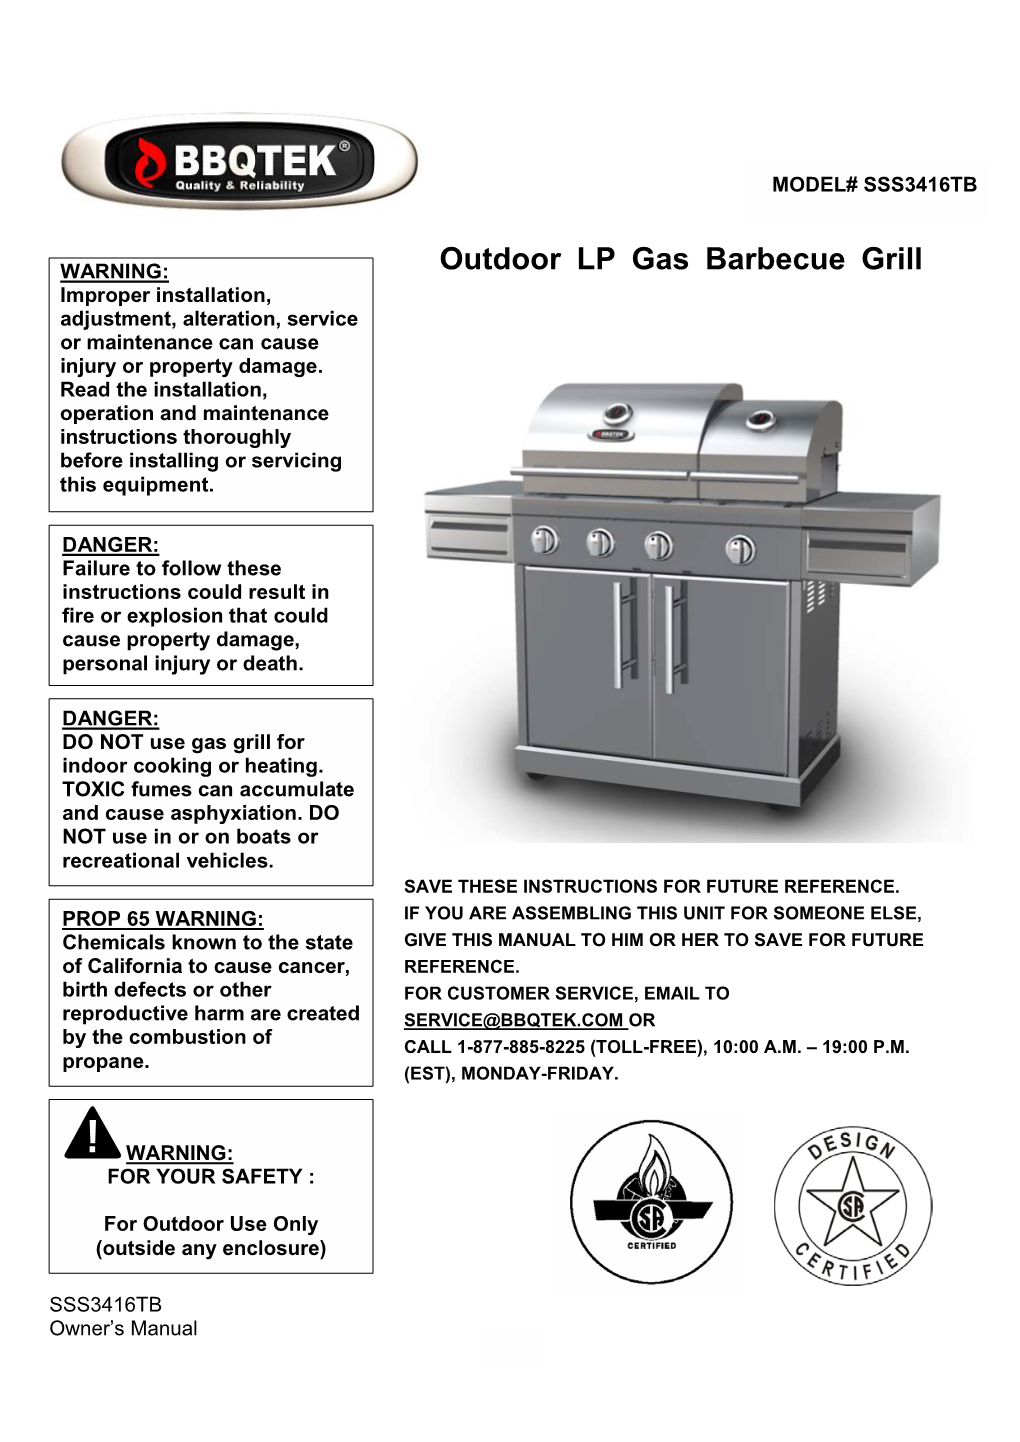 Outdoor LP Gas Barbecue Grill Improper Installation, Adjustment, Alteration, Service Or Maintenance Can Cause Injury Or Property Damage